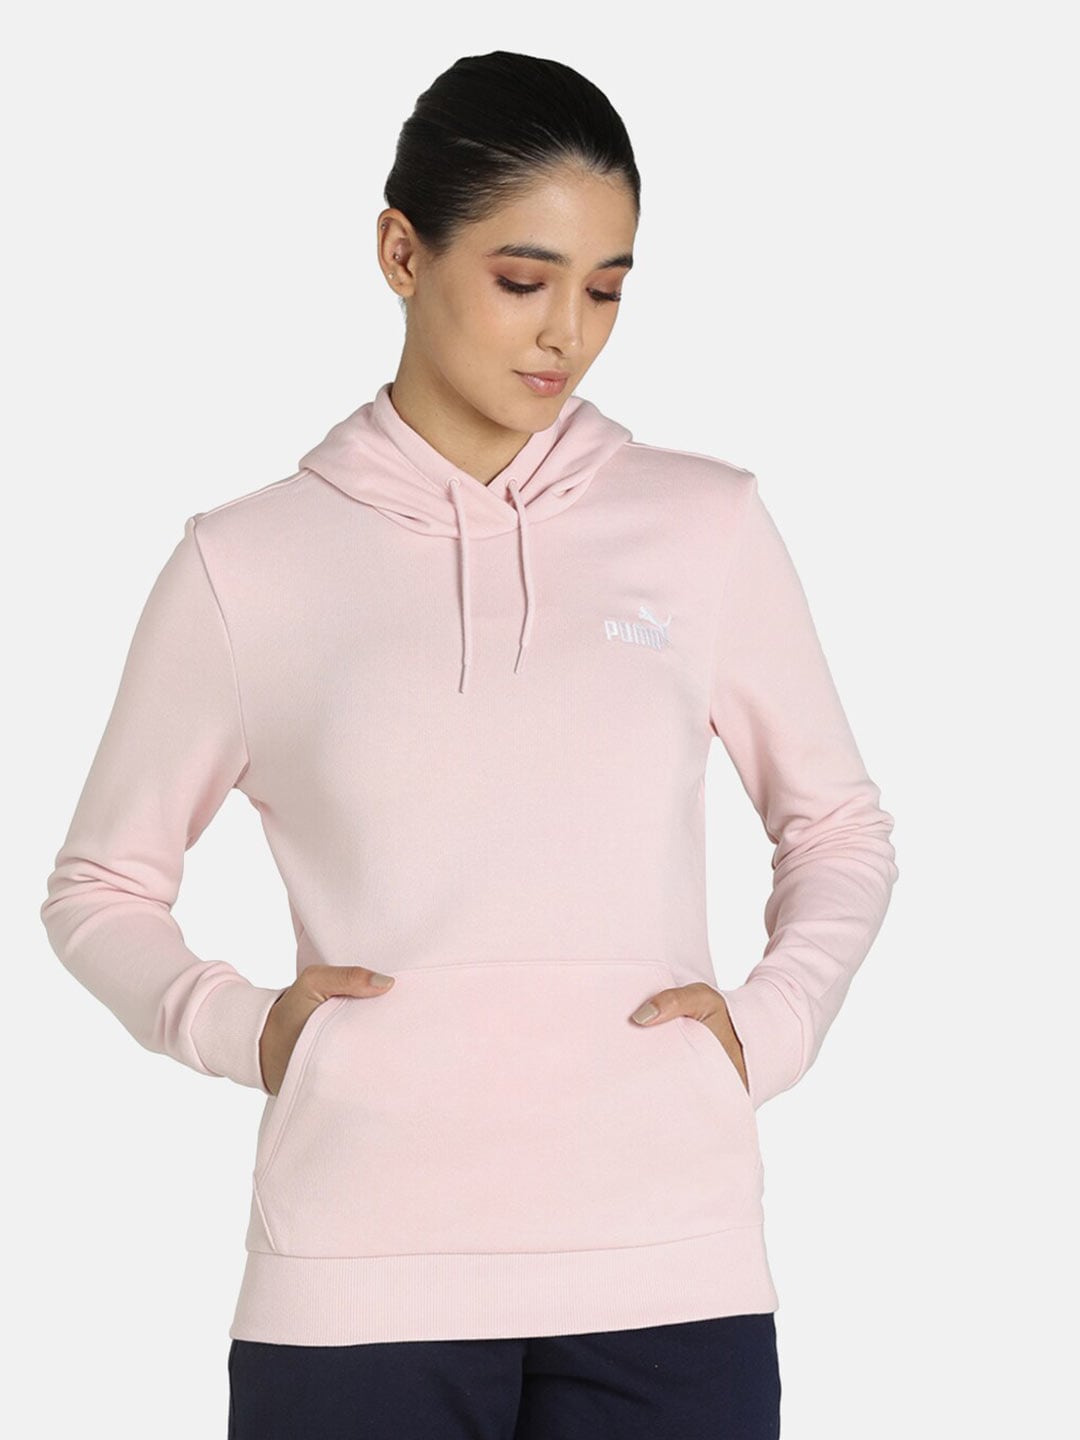 Puma Women Pink Essentials Embroidery Cotton Hoodie Price in India